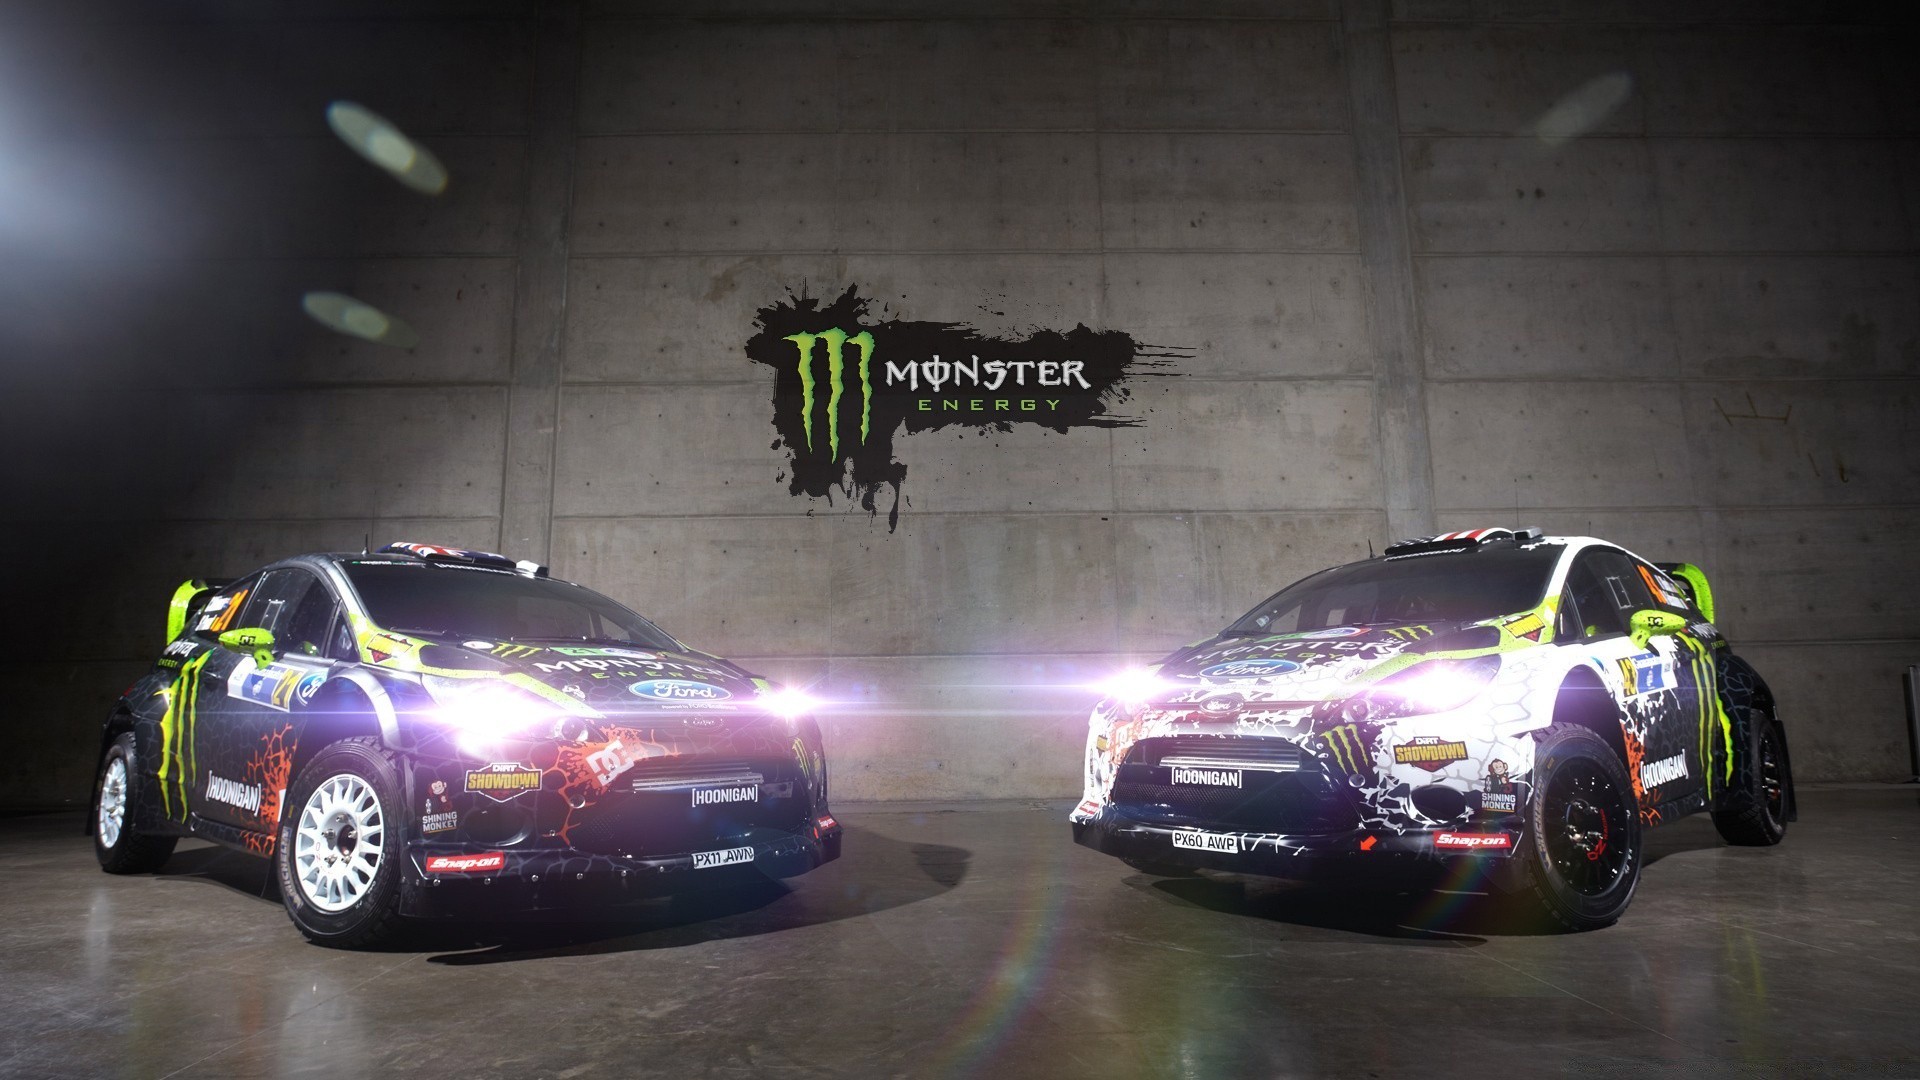 Cars Car Vehicle Race Hurry Fast Competition Wheel - Ford Fiesta Monster Energy - HD Wallpaper 